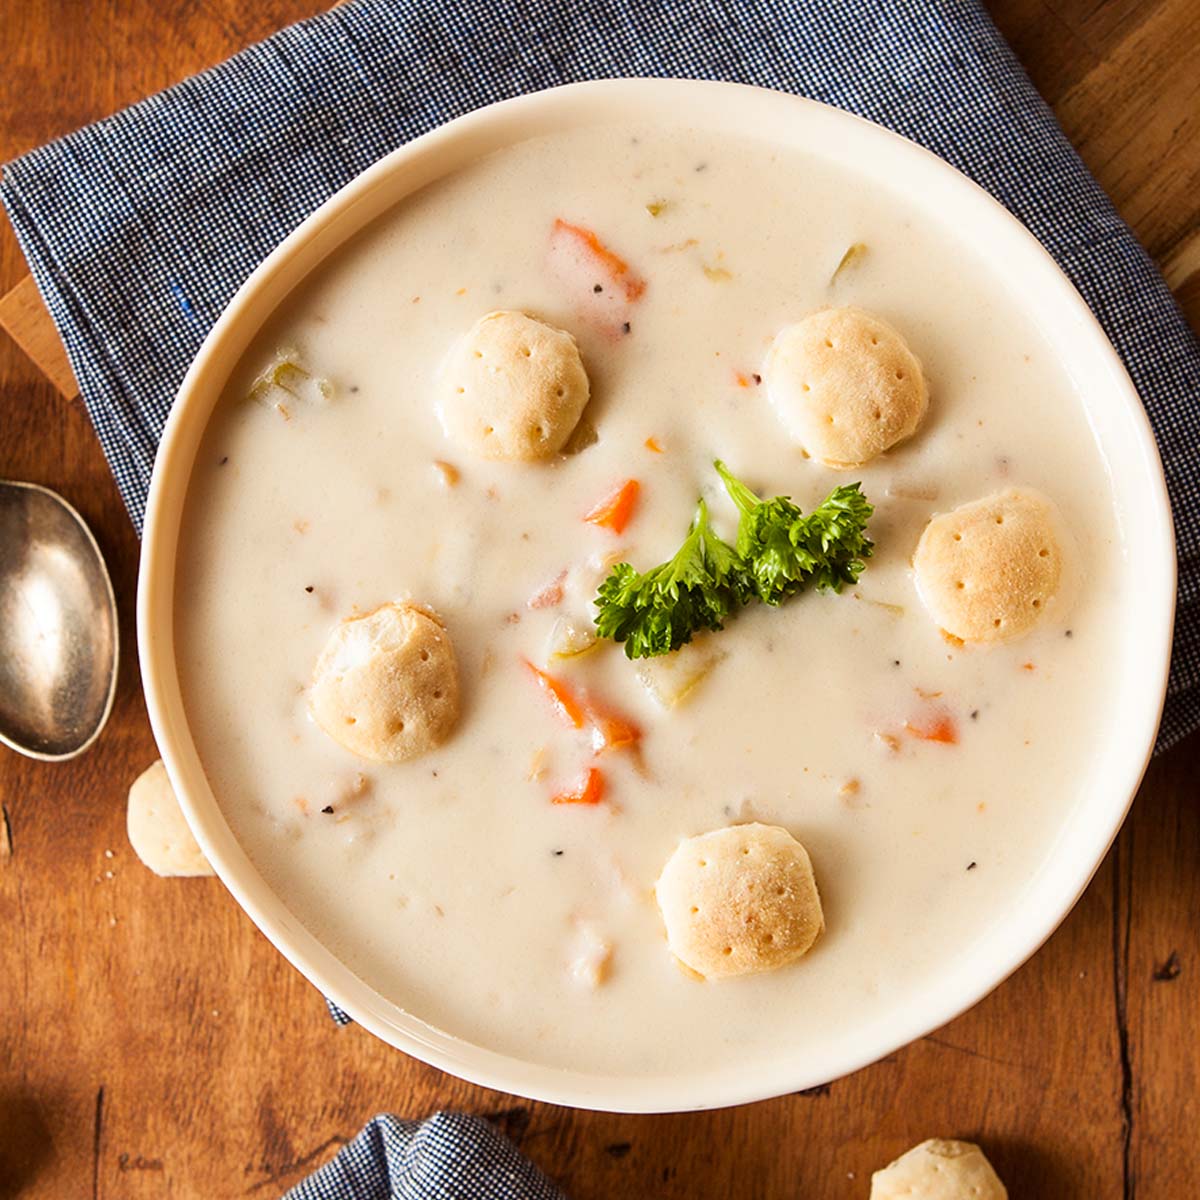 Learn how to store your clam chowder in the recommended way (which I go into in more detail shortly), frozen clam chowder will last for up to 6 months.